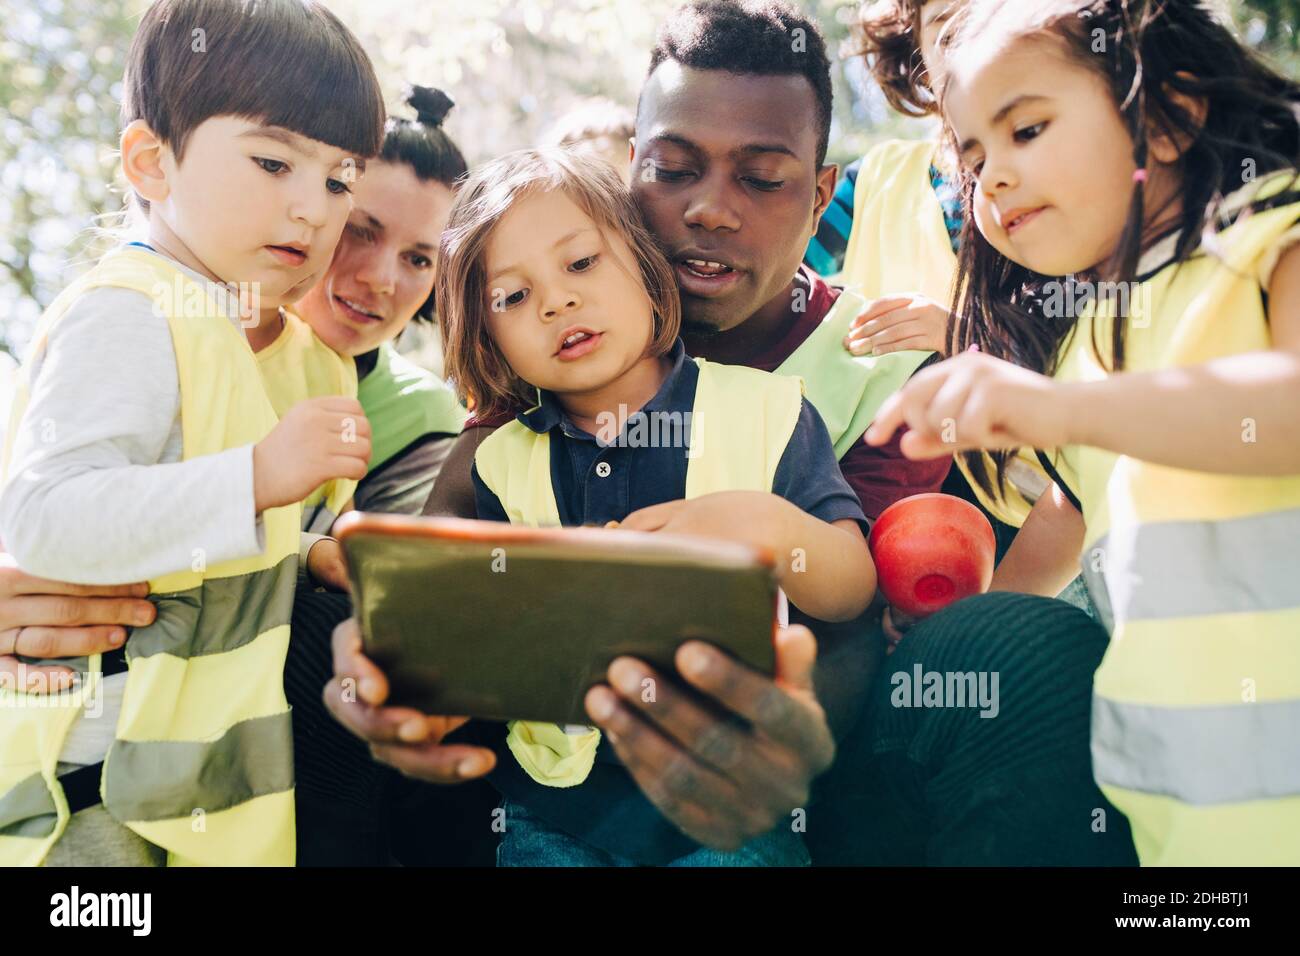 Multi-ethnic students and teachers sharing digital tablet in playground Stock Photo